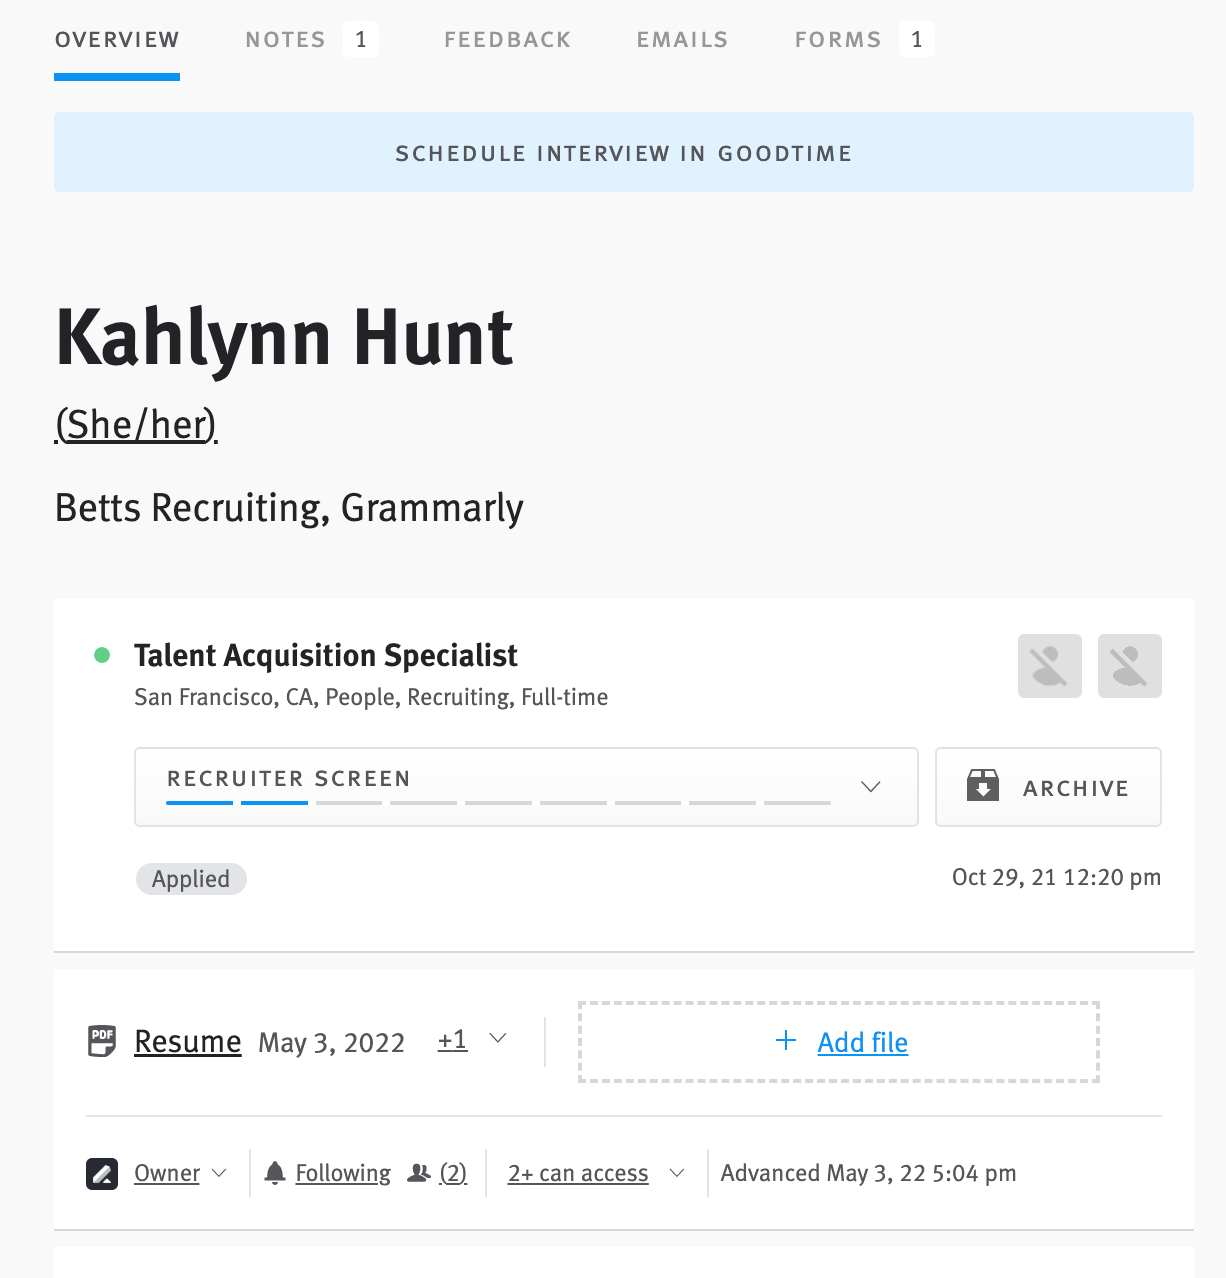 Candidate profile with schedule interview in goodtime confirmation button